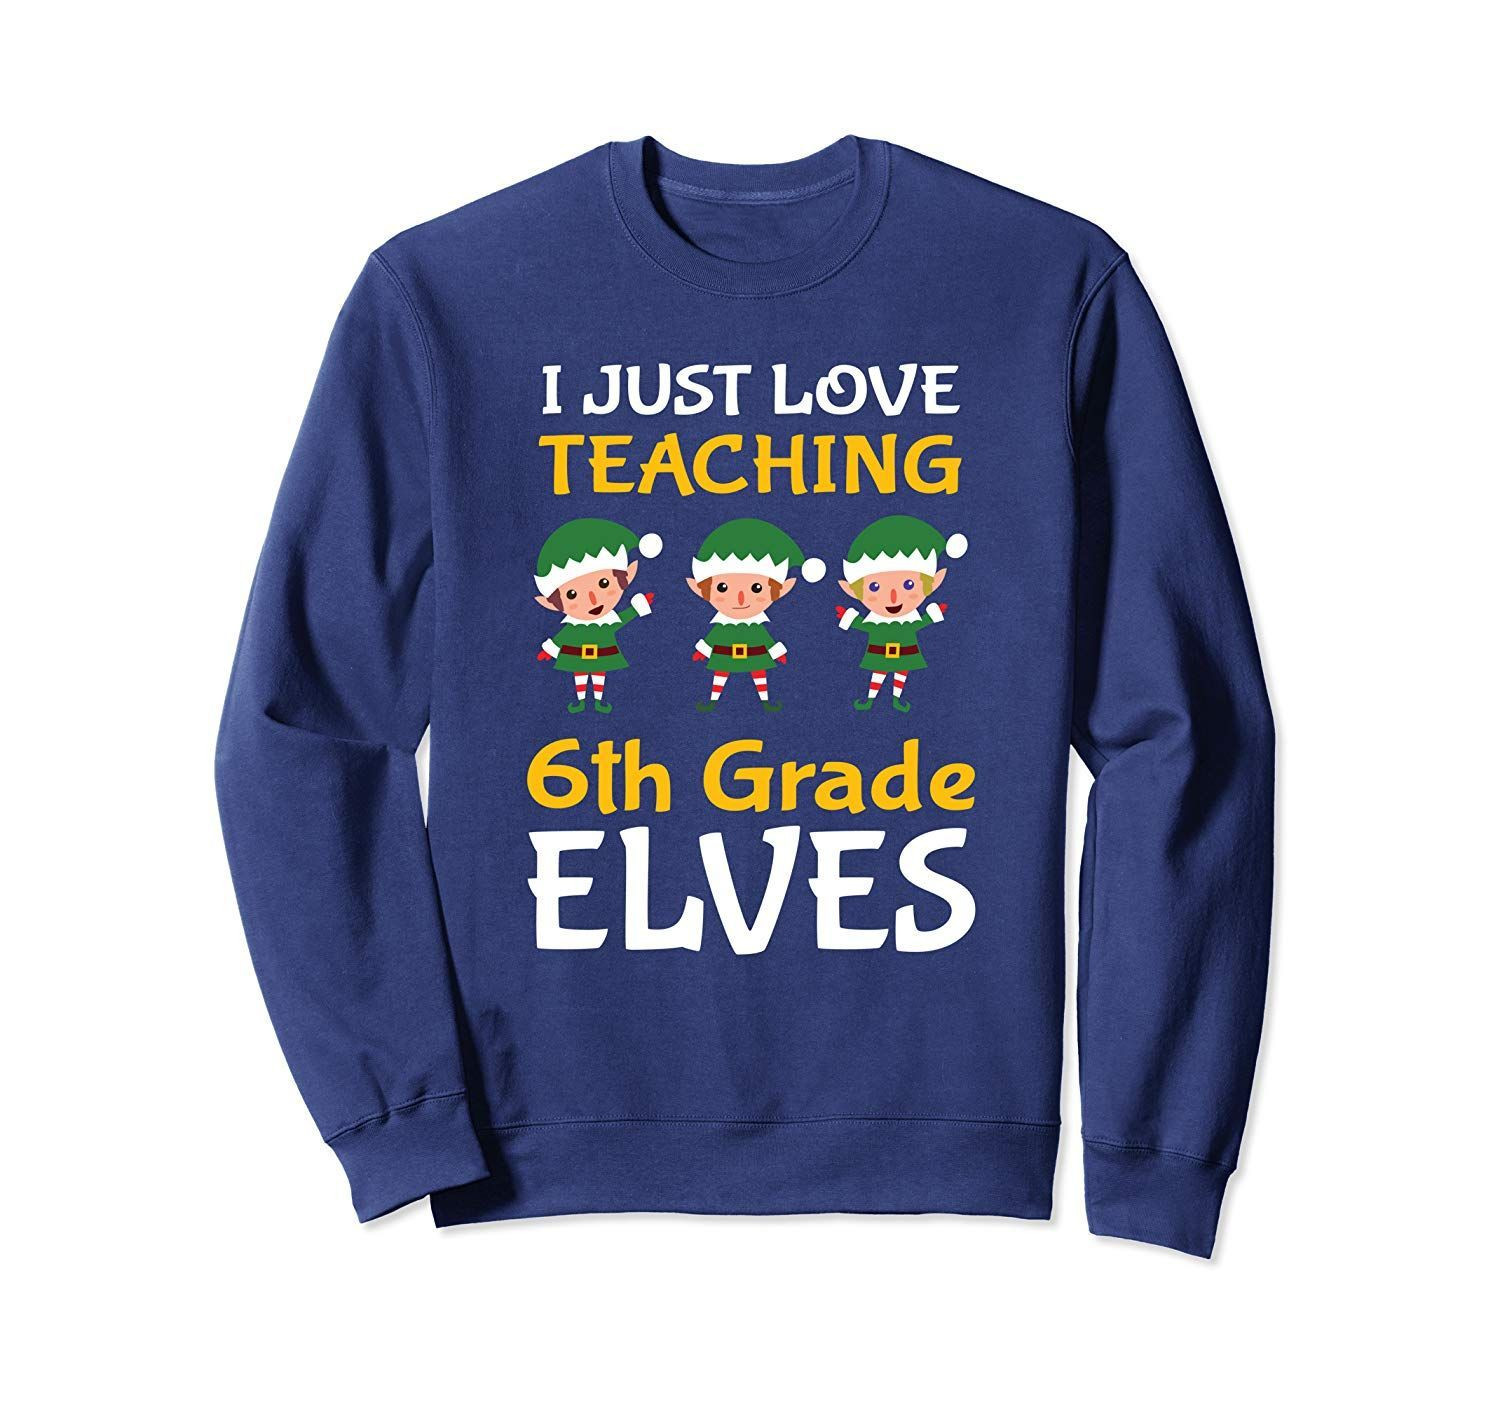 6Th Grade Christmas Party Ideas
 Pin on Elf Shirts